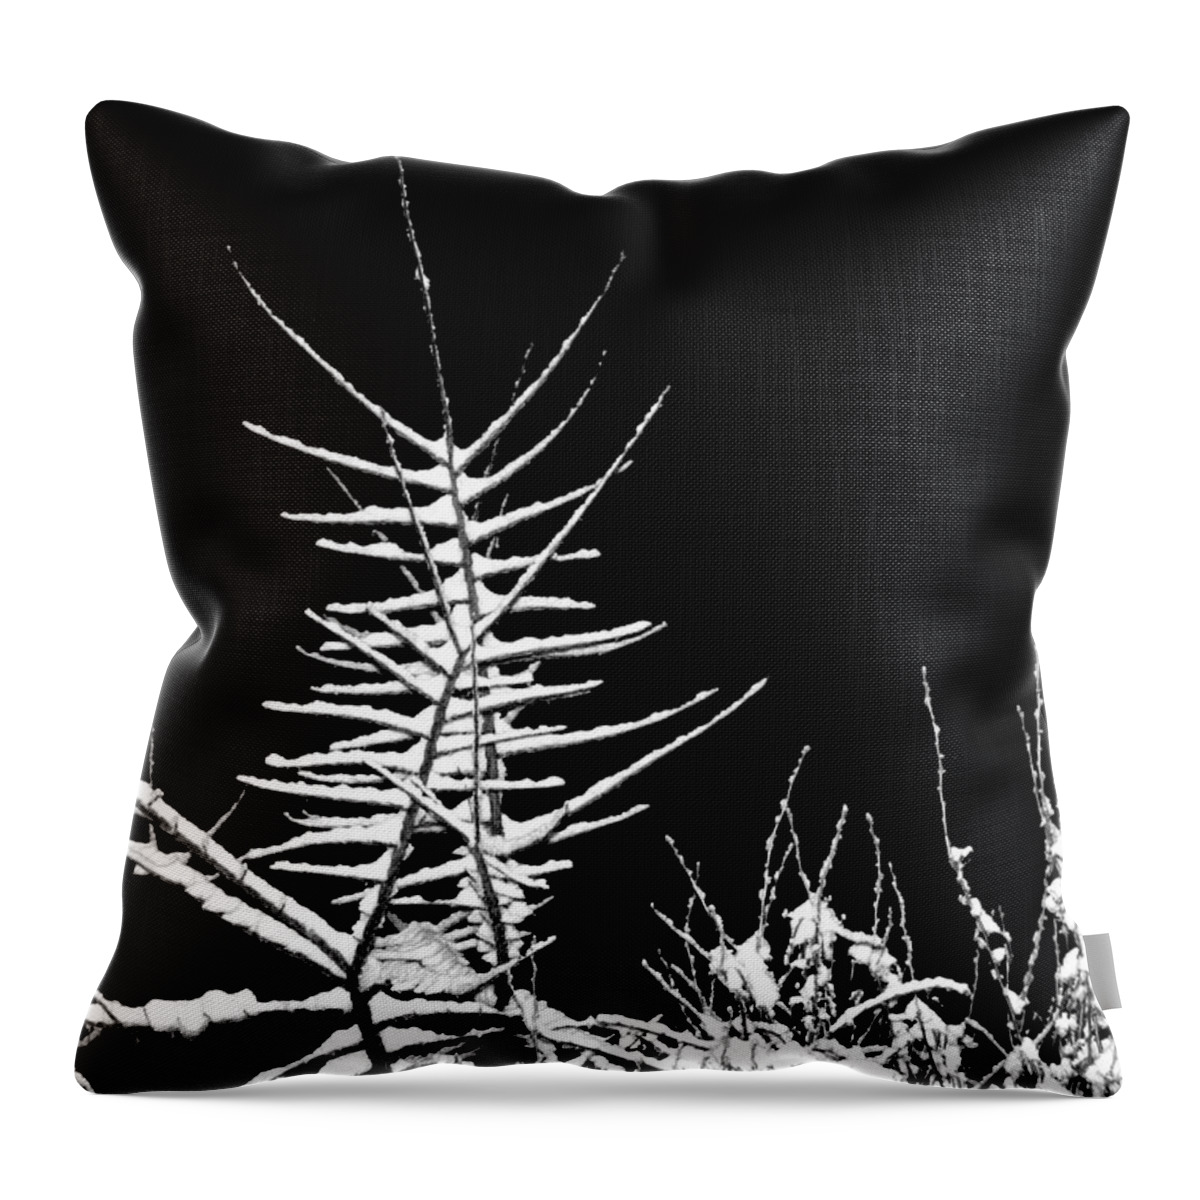 Night Throw Pillow featuring the photograph Night Shot 1 by Will Borden